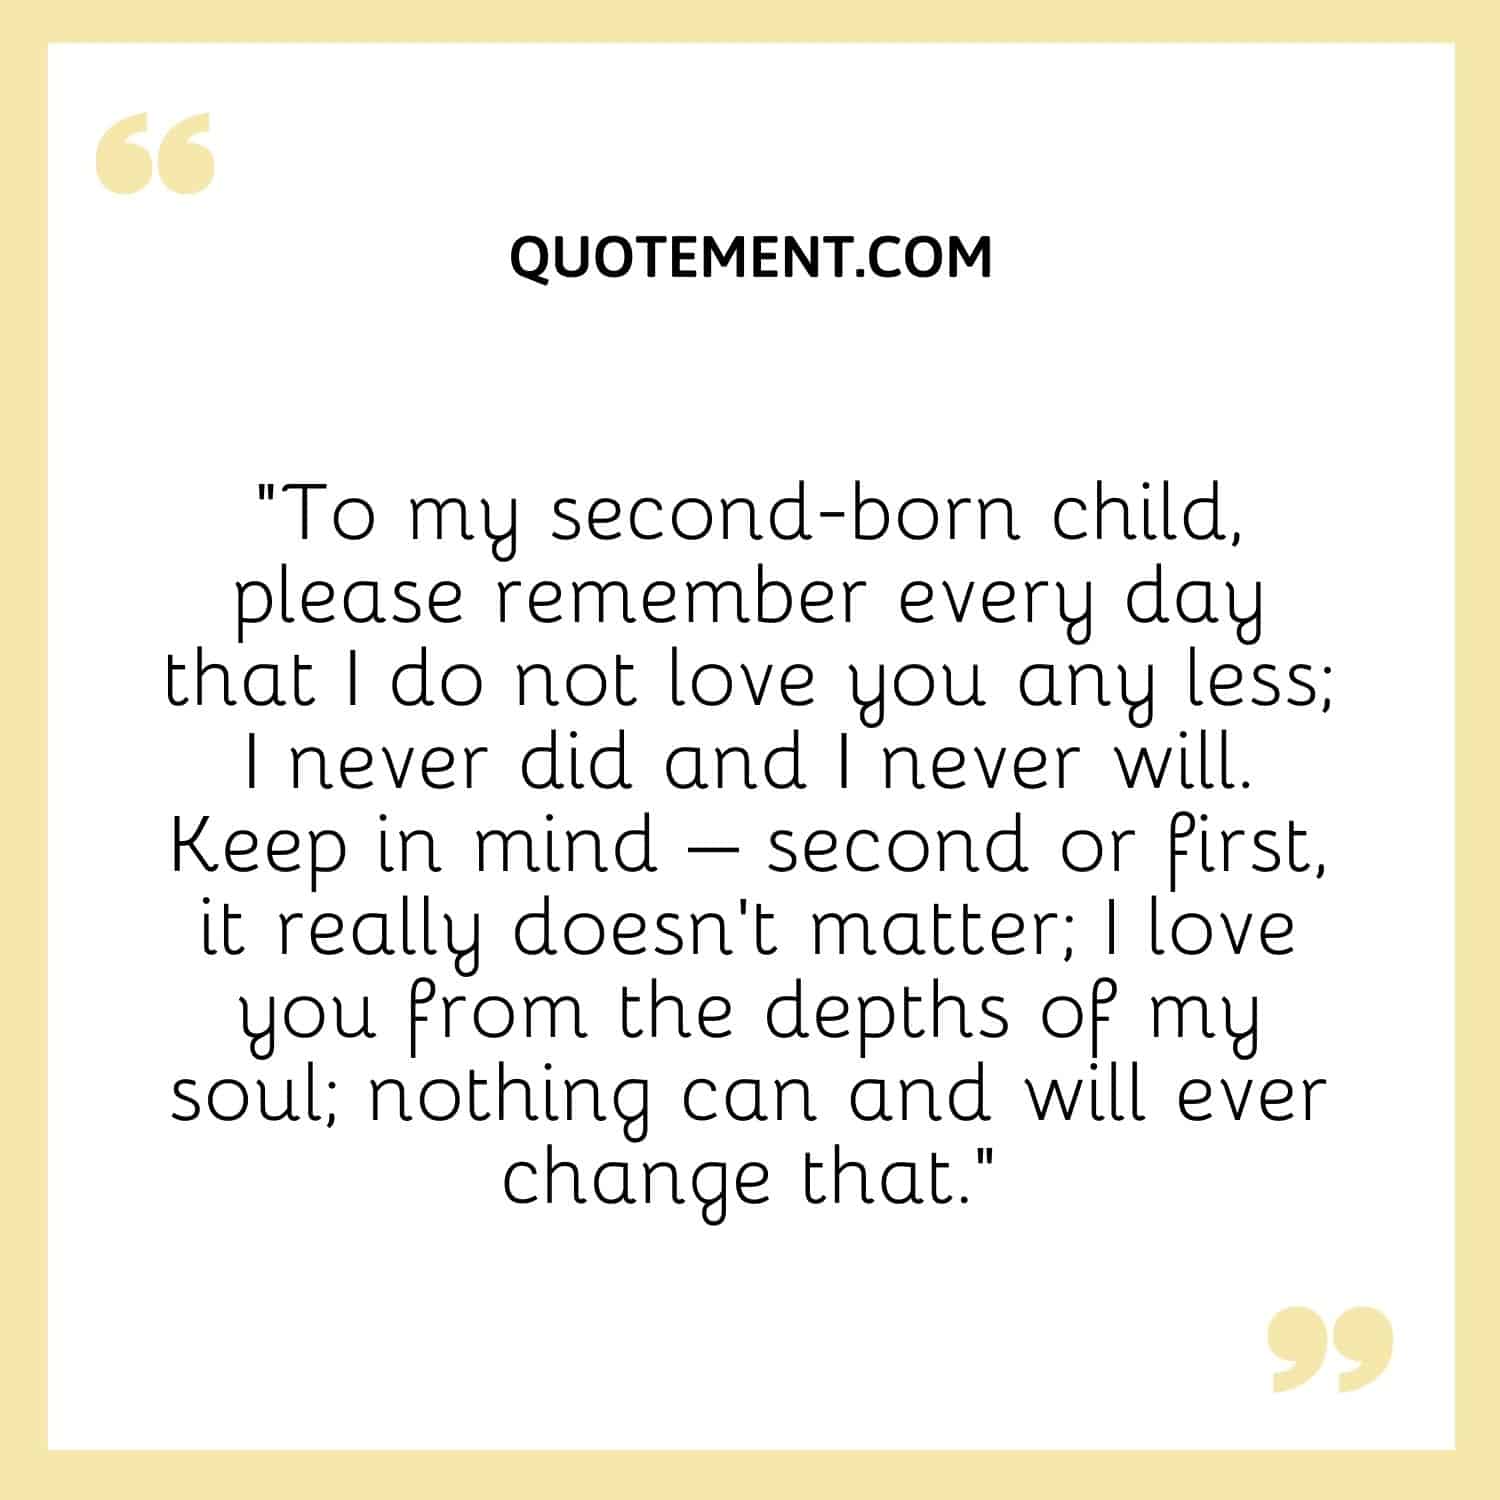 To my second-born child, please remember every day that I do not love you any less